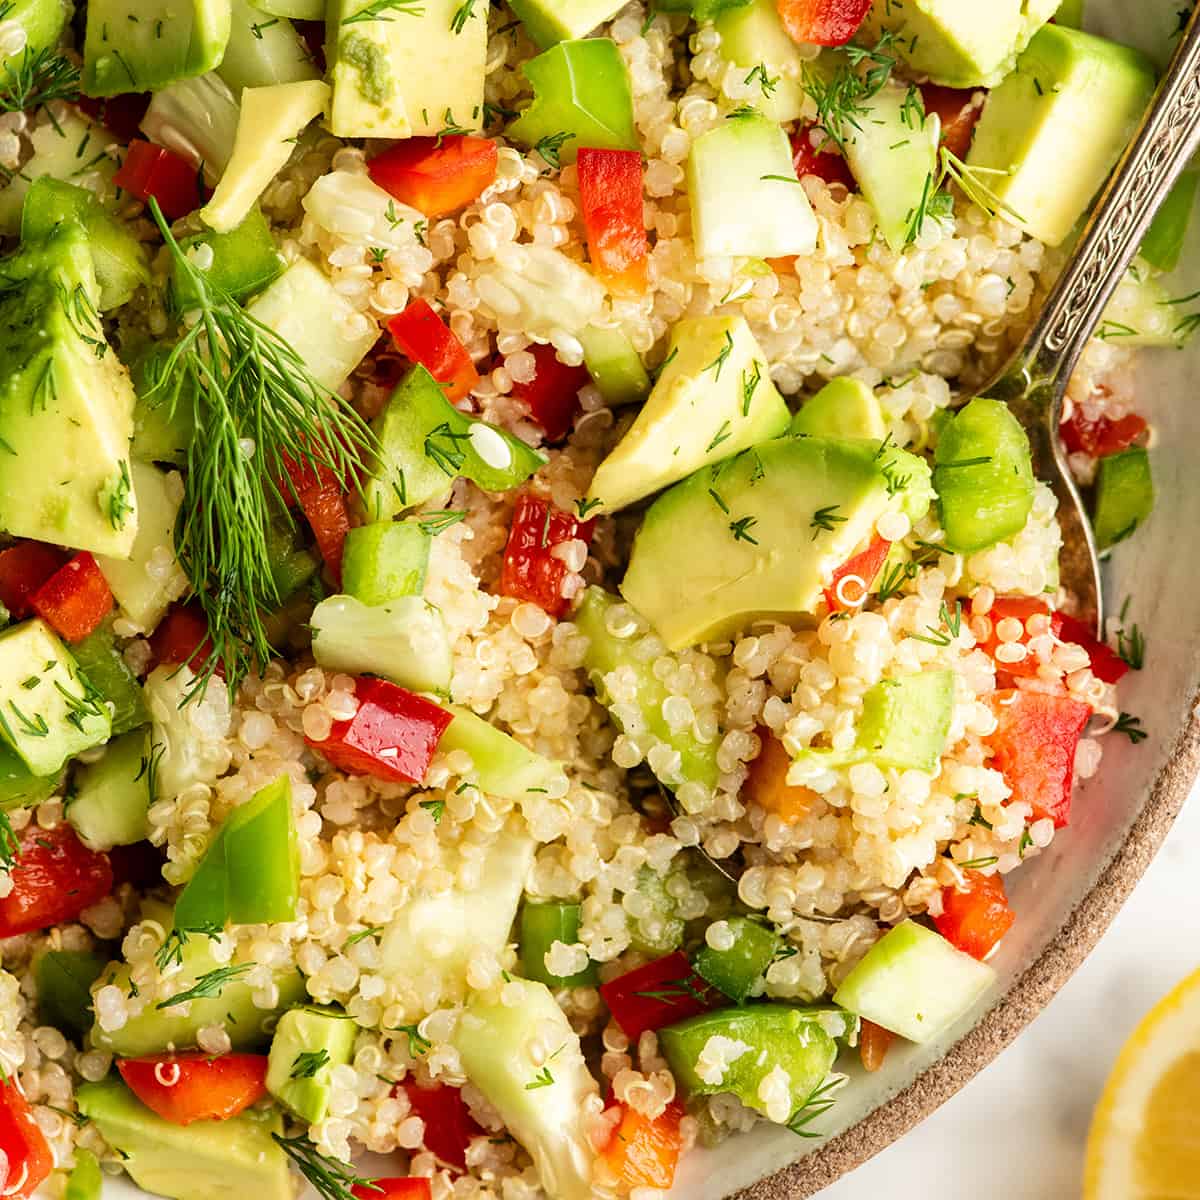 up close photo of a spoon taking a scoop of Quinoa Salad Recipe out of a bowl